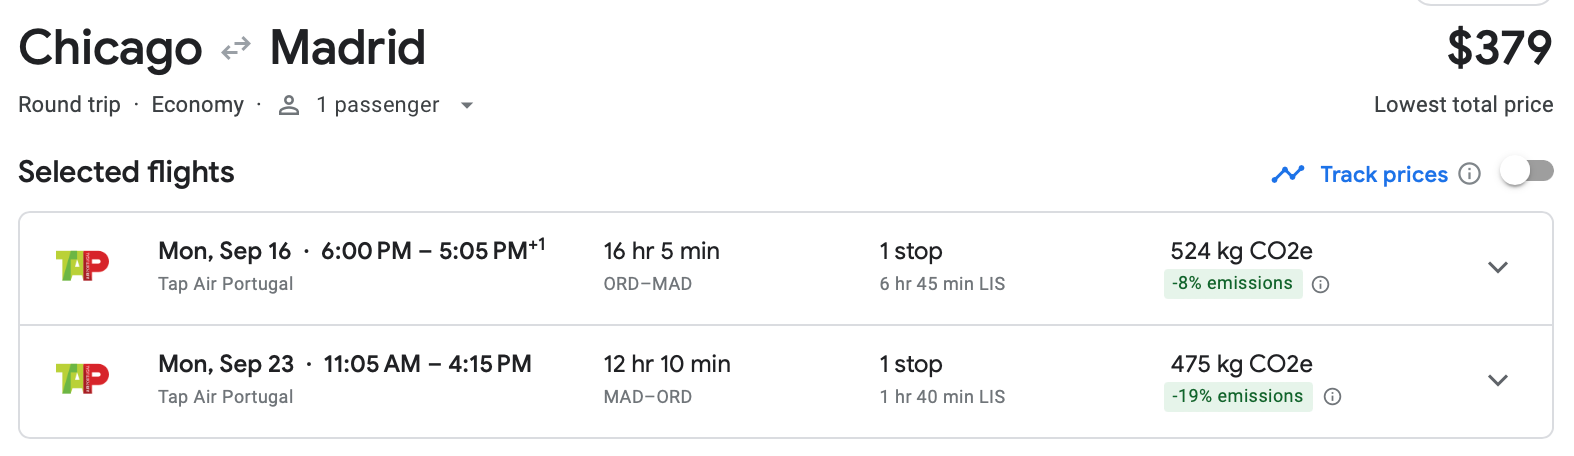 Screenshot of a roundtrip flight between Chicago and Madrid on TAP